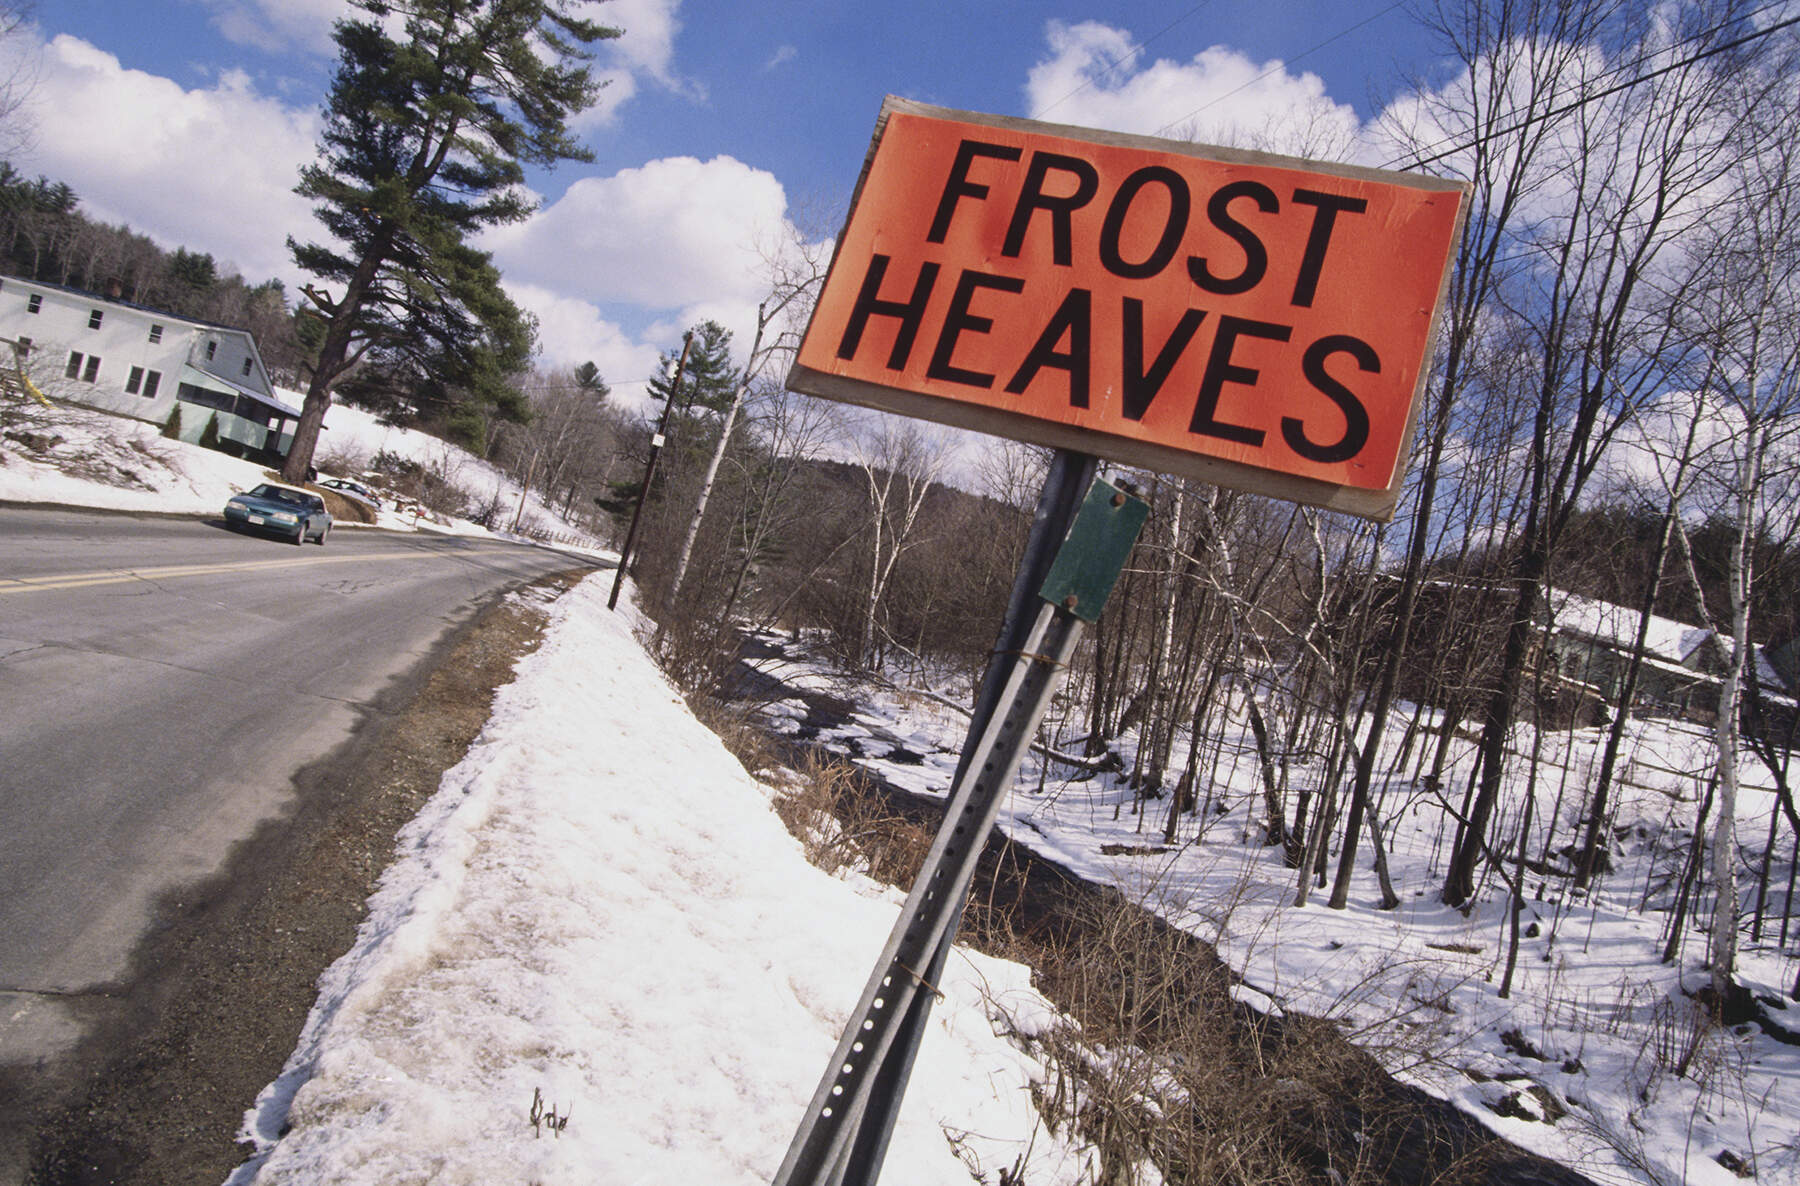 "Frost Heaves" sign along a snowy road. (Photo by © Viviane Moos/CORBIS/Corbis via Getty Images)